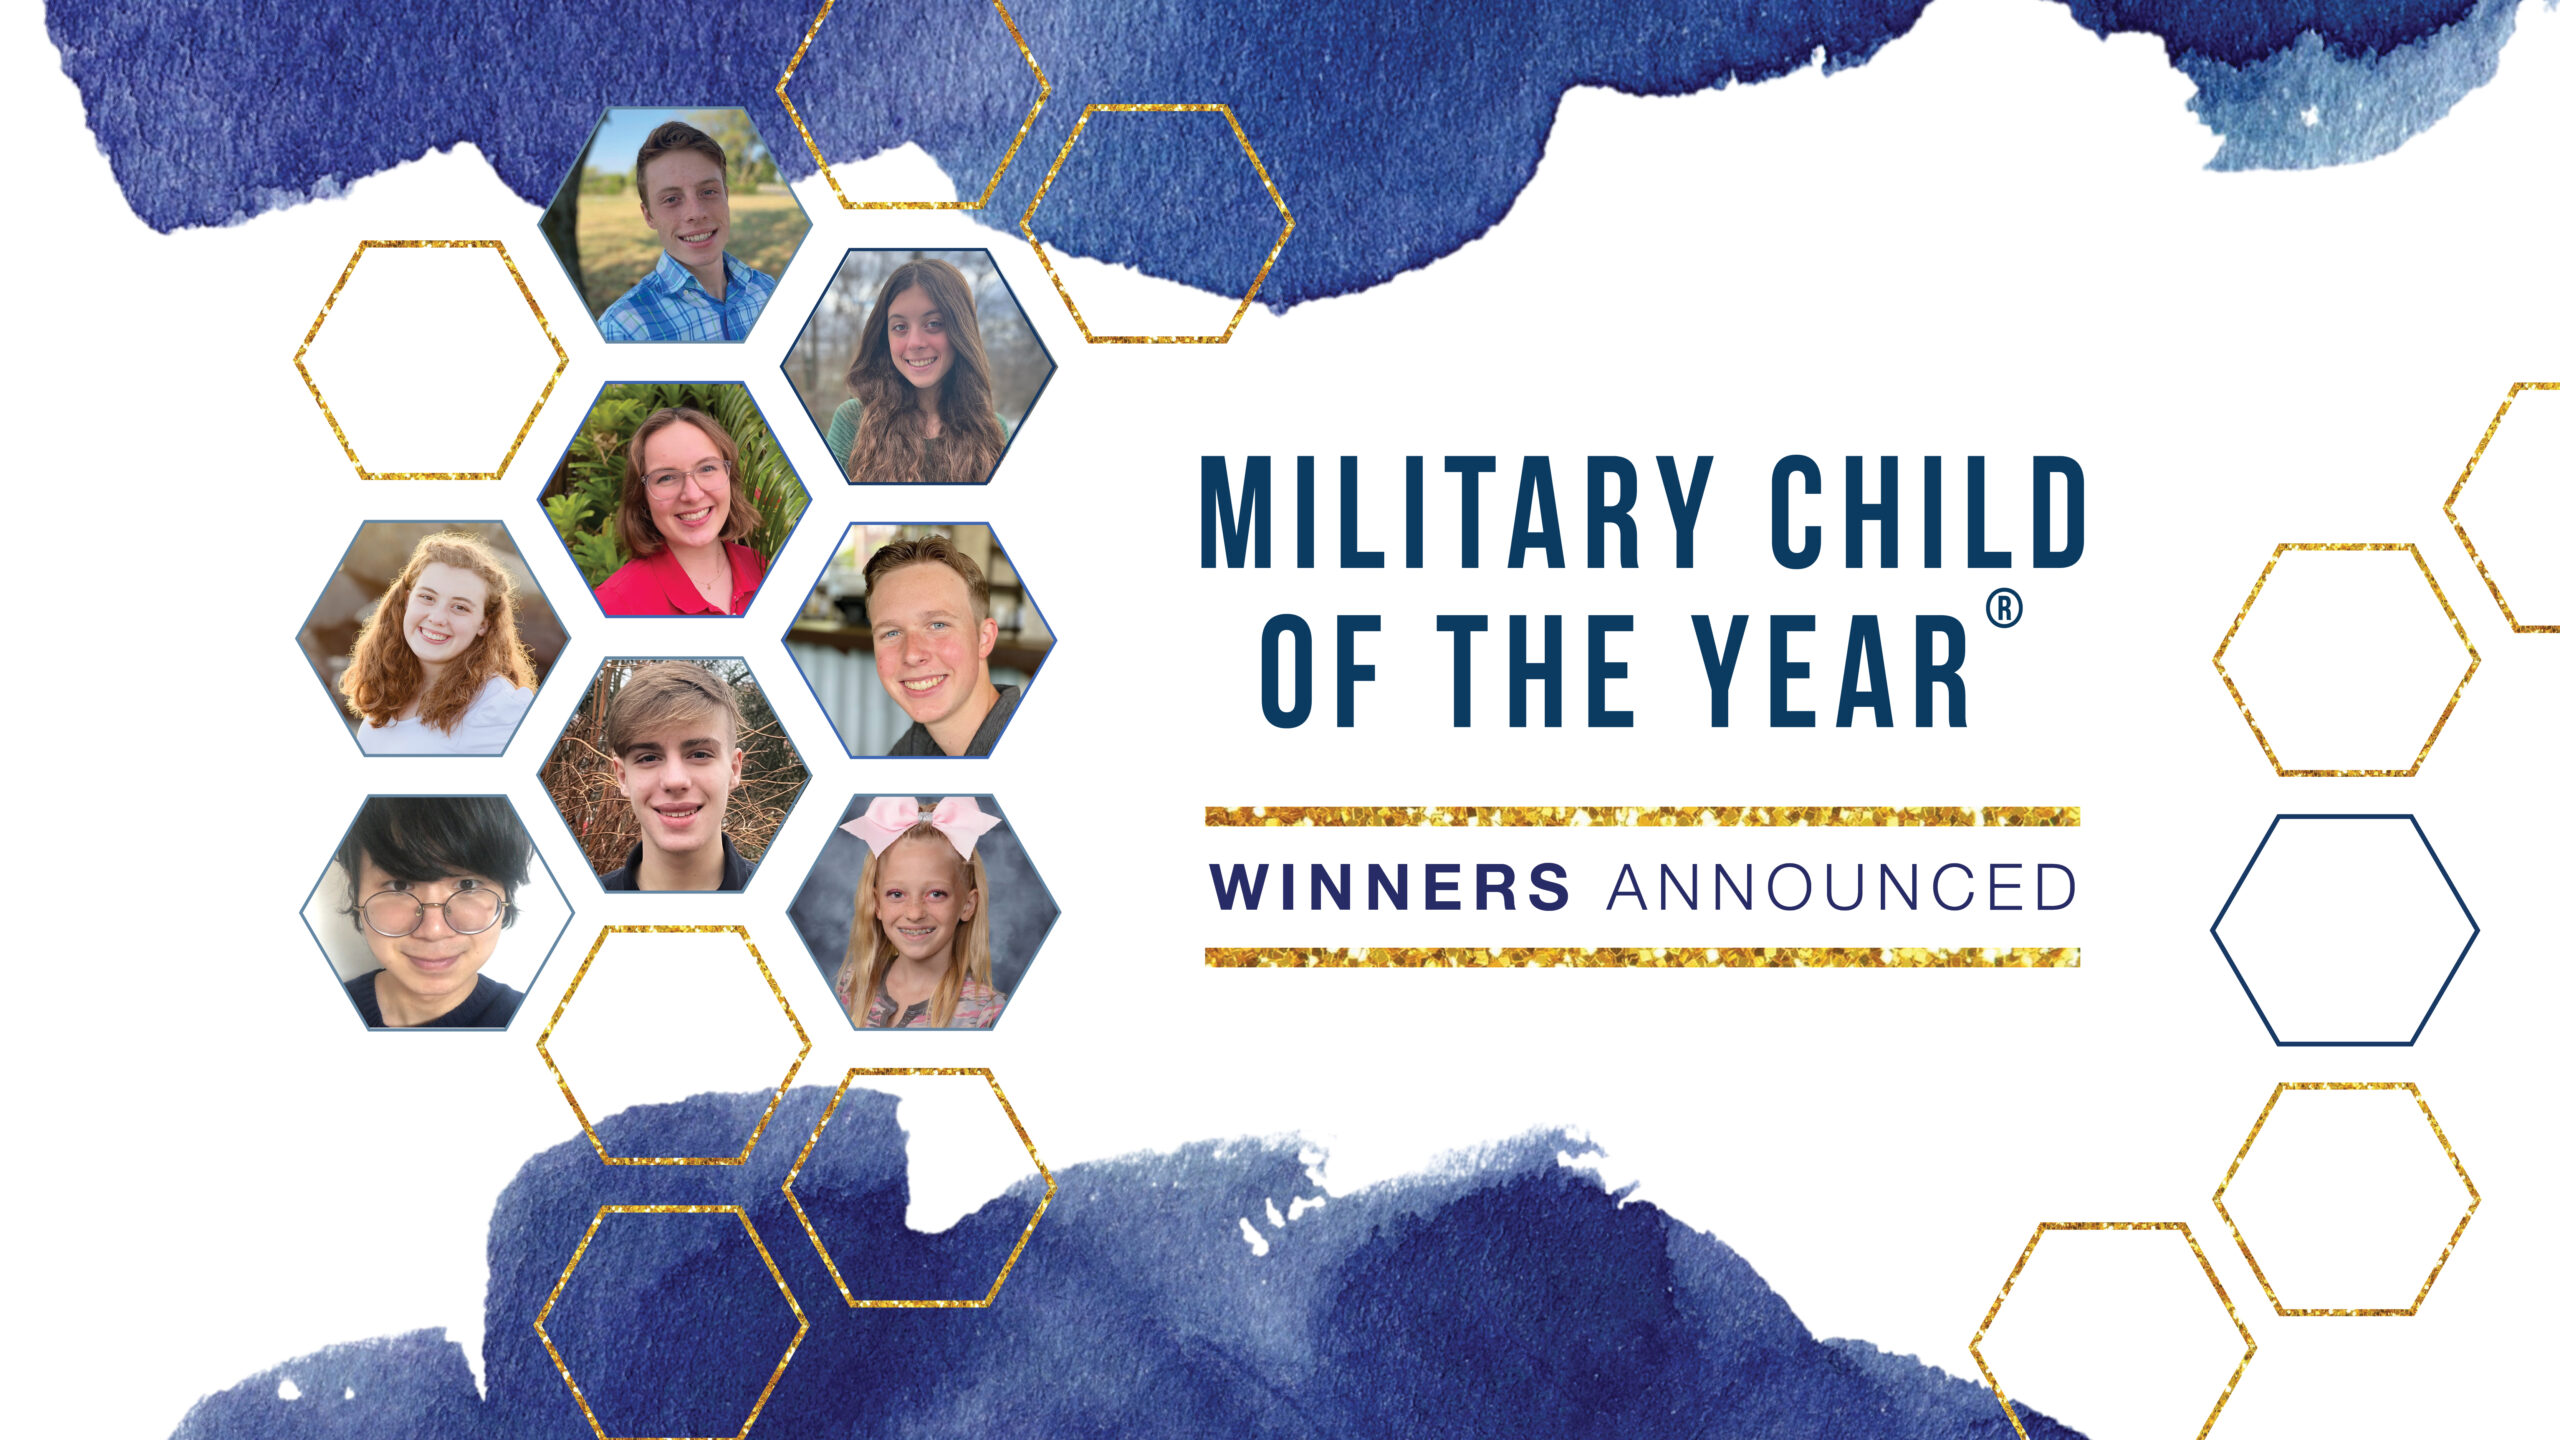 Military Child of the Year® Award recipients graphic